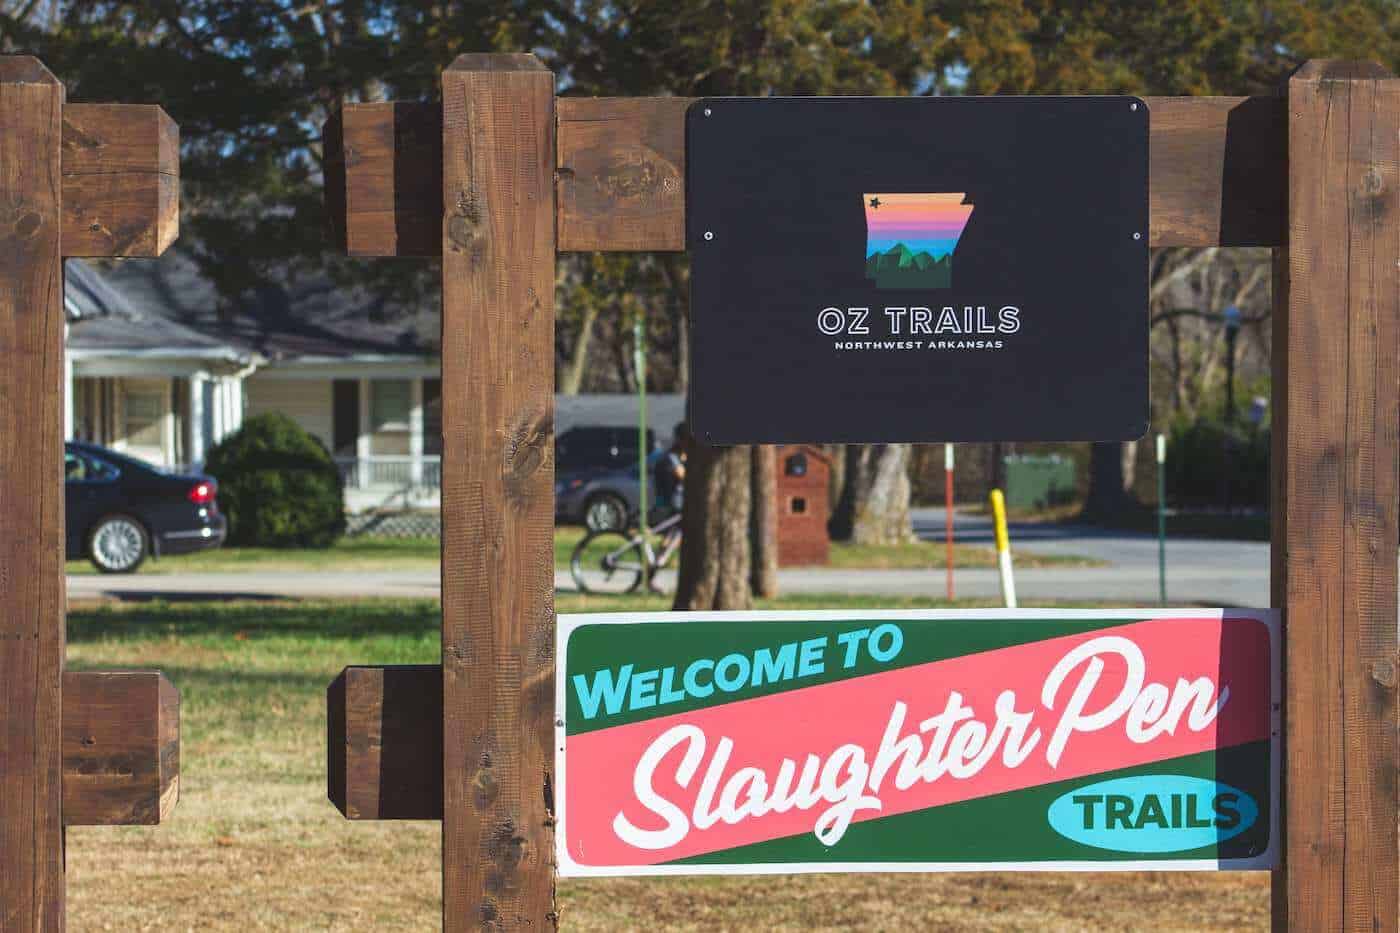 Two signs on fence in Bentonville Arkansas. One reads "Oz Trails" and the other reads "Slaughter Pen Trails"